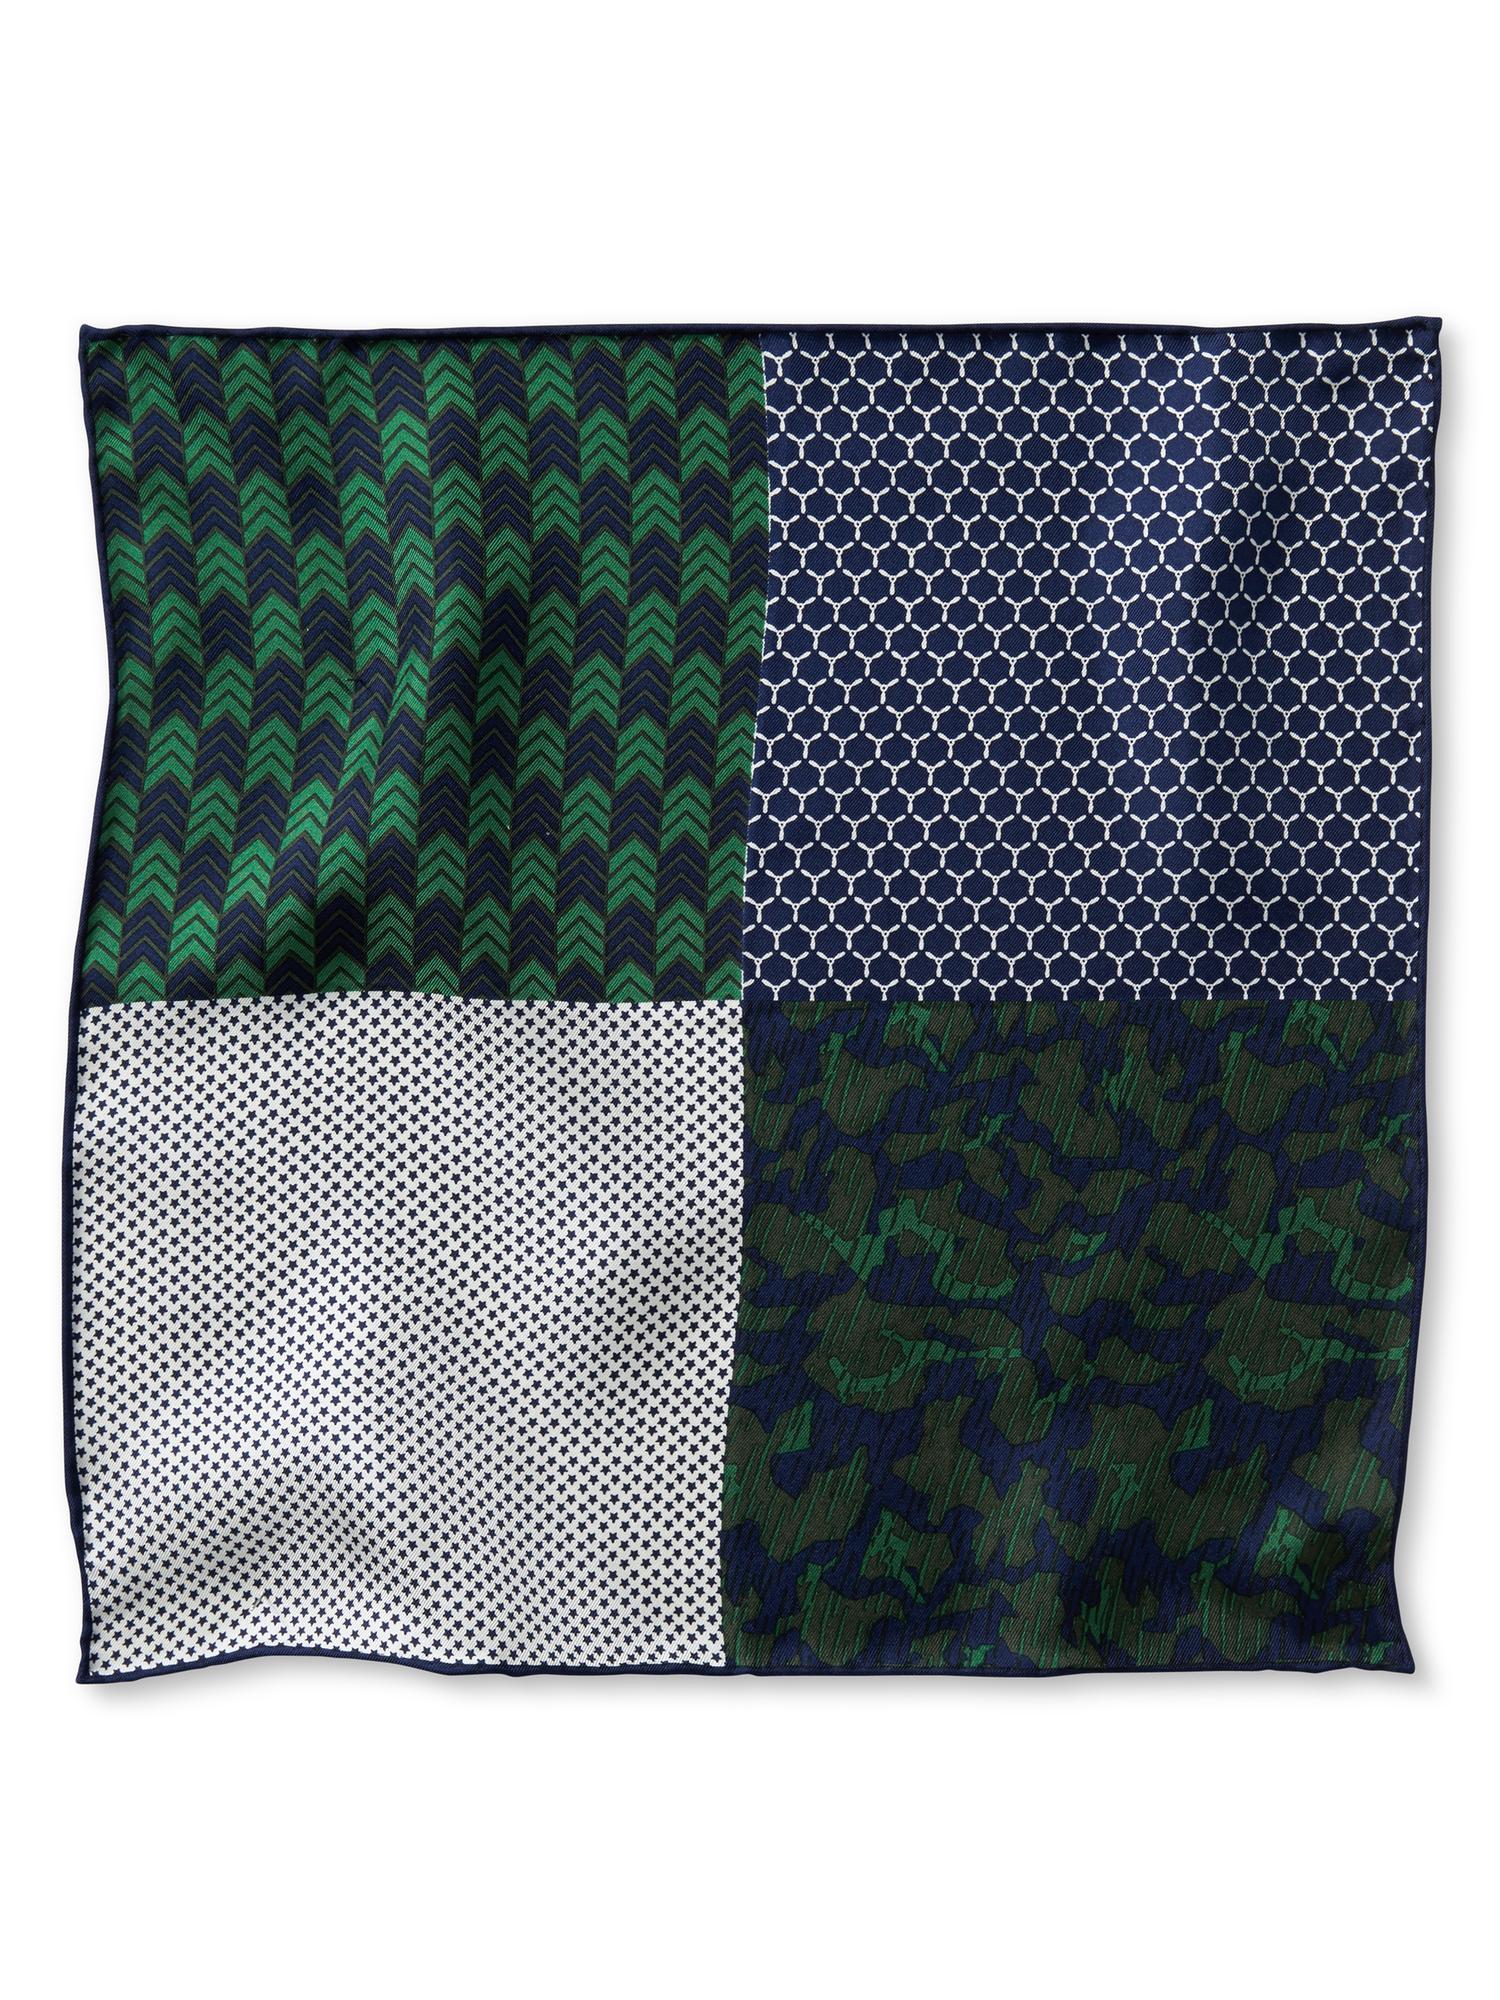 Four-in-One Military Silk Pocket Square